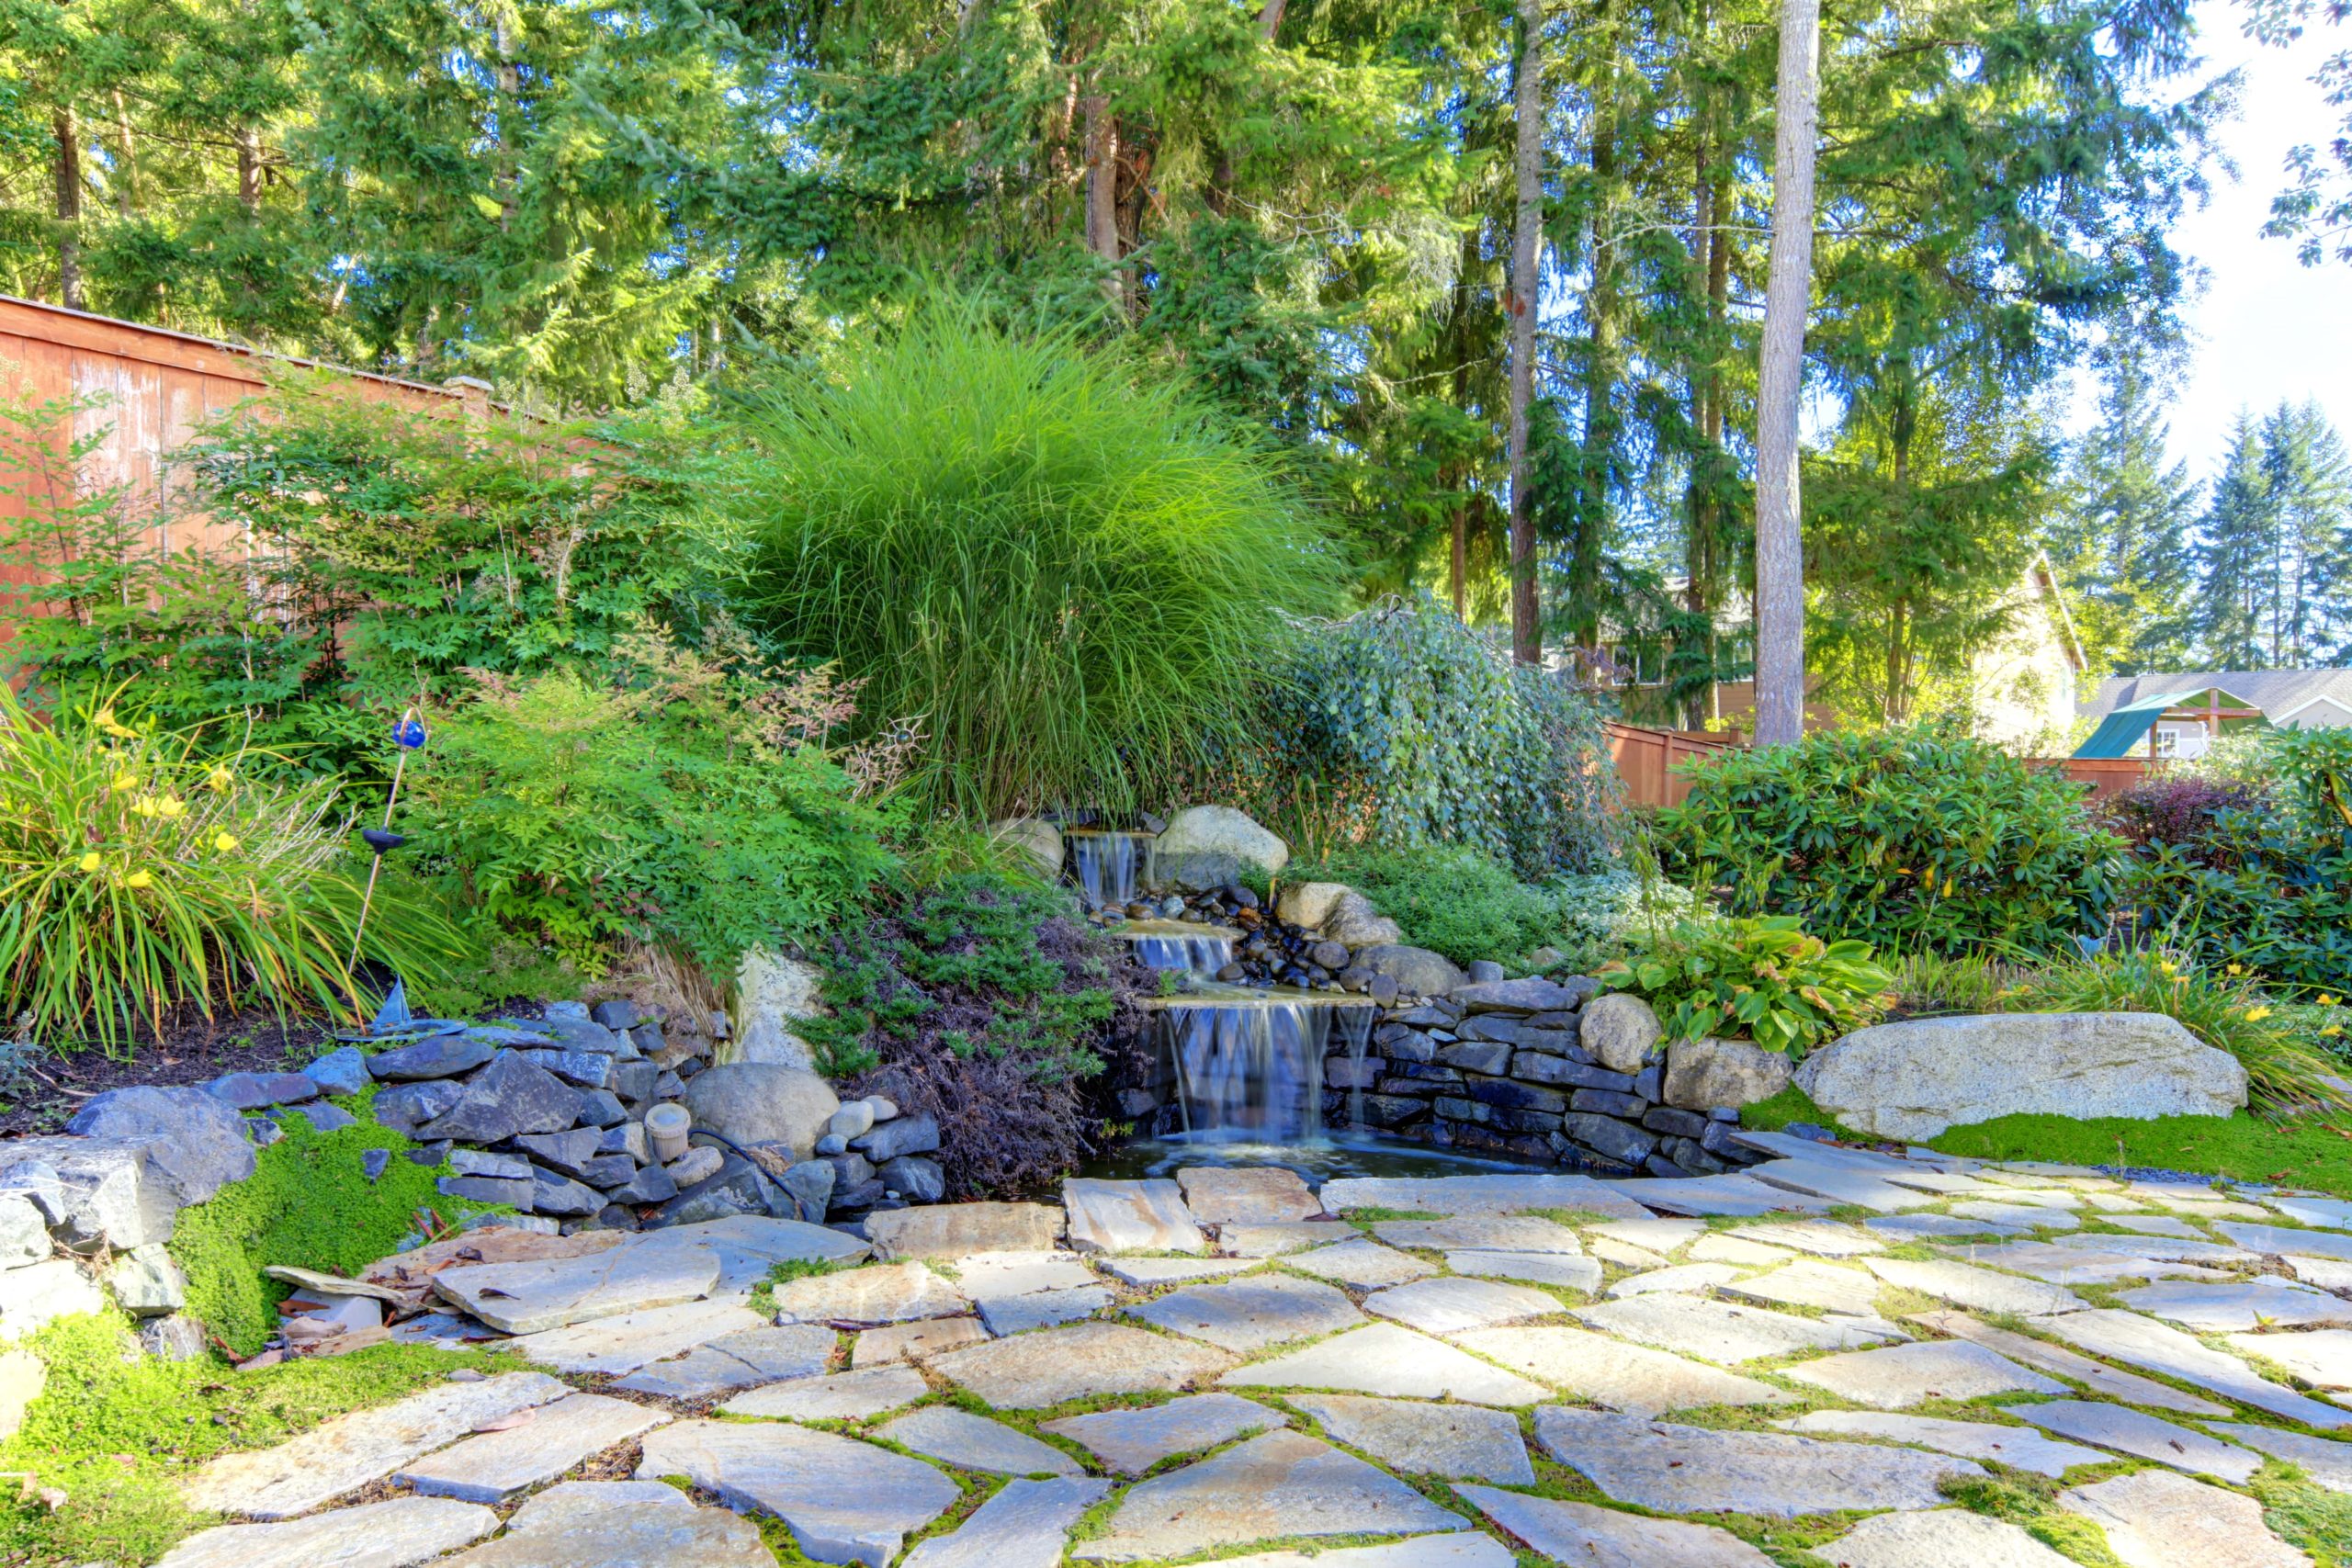 Backyard landscape with stone patio and small waterfall.